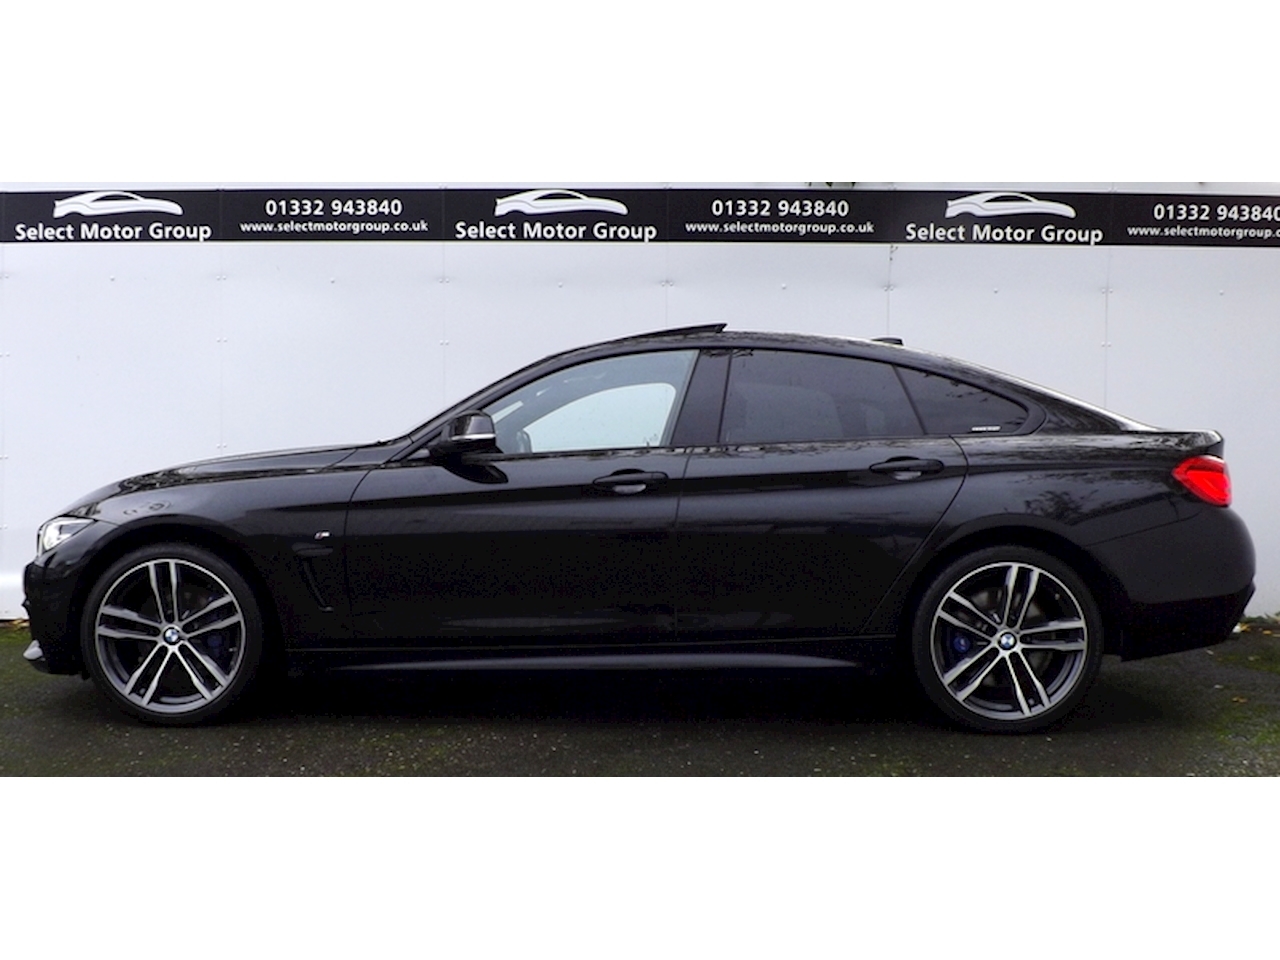 4 Series Gran Coupe 420D 2.0 190 Xdrive M Sport STEP 5dr Hatchback Automatic Diesel